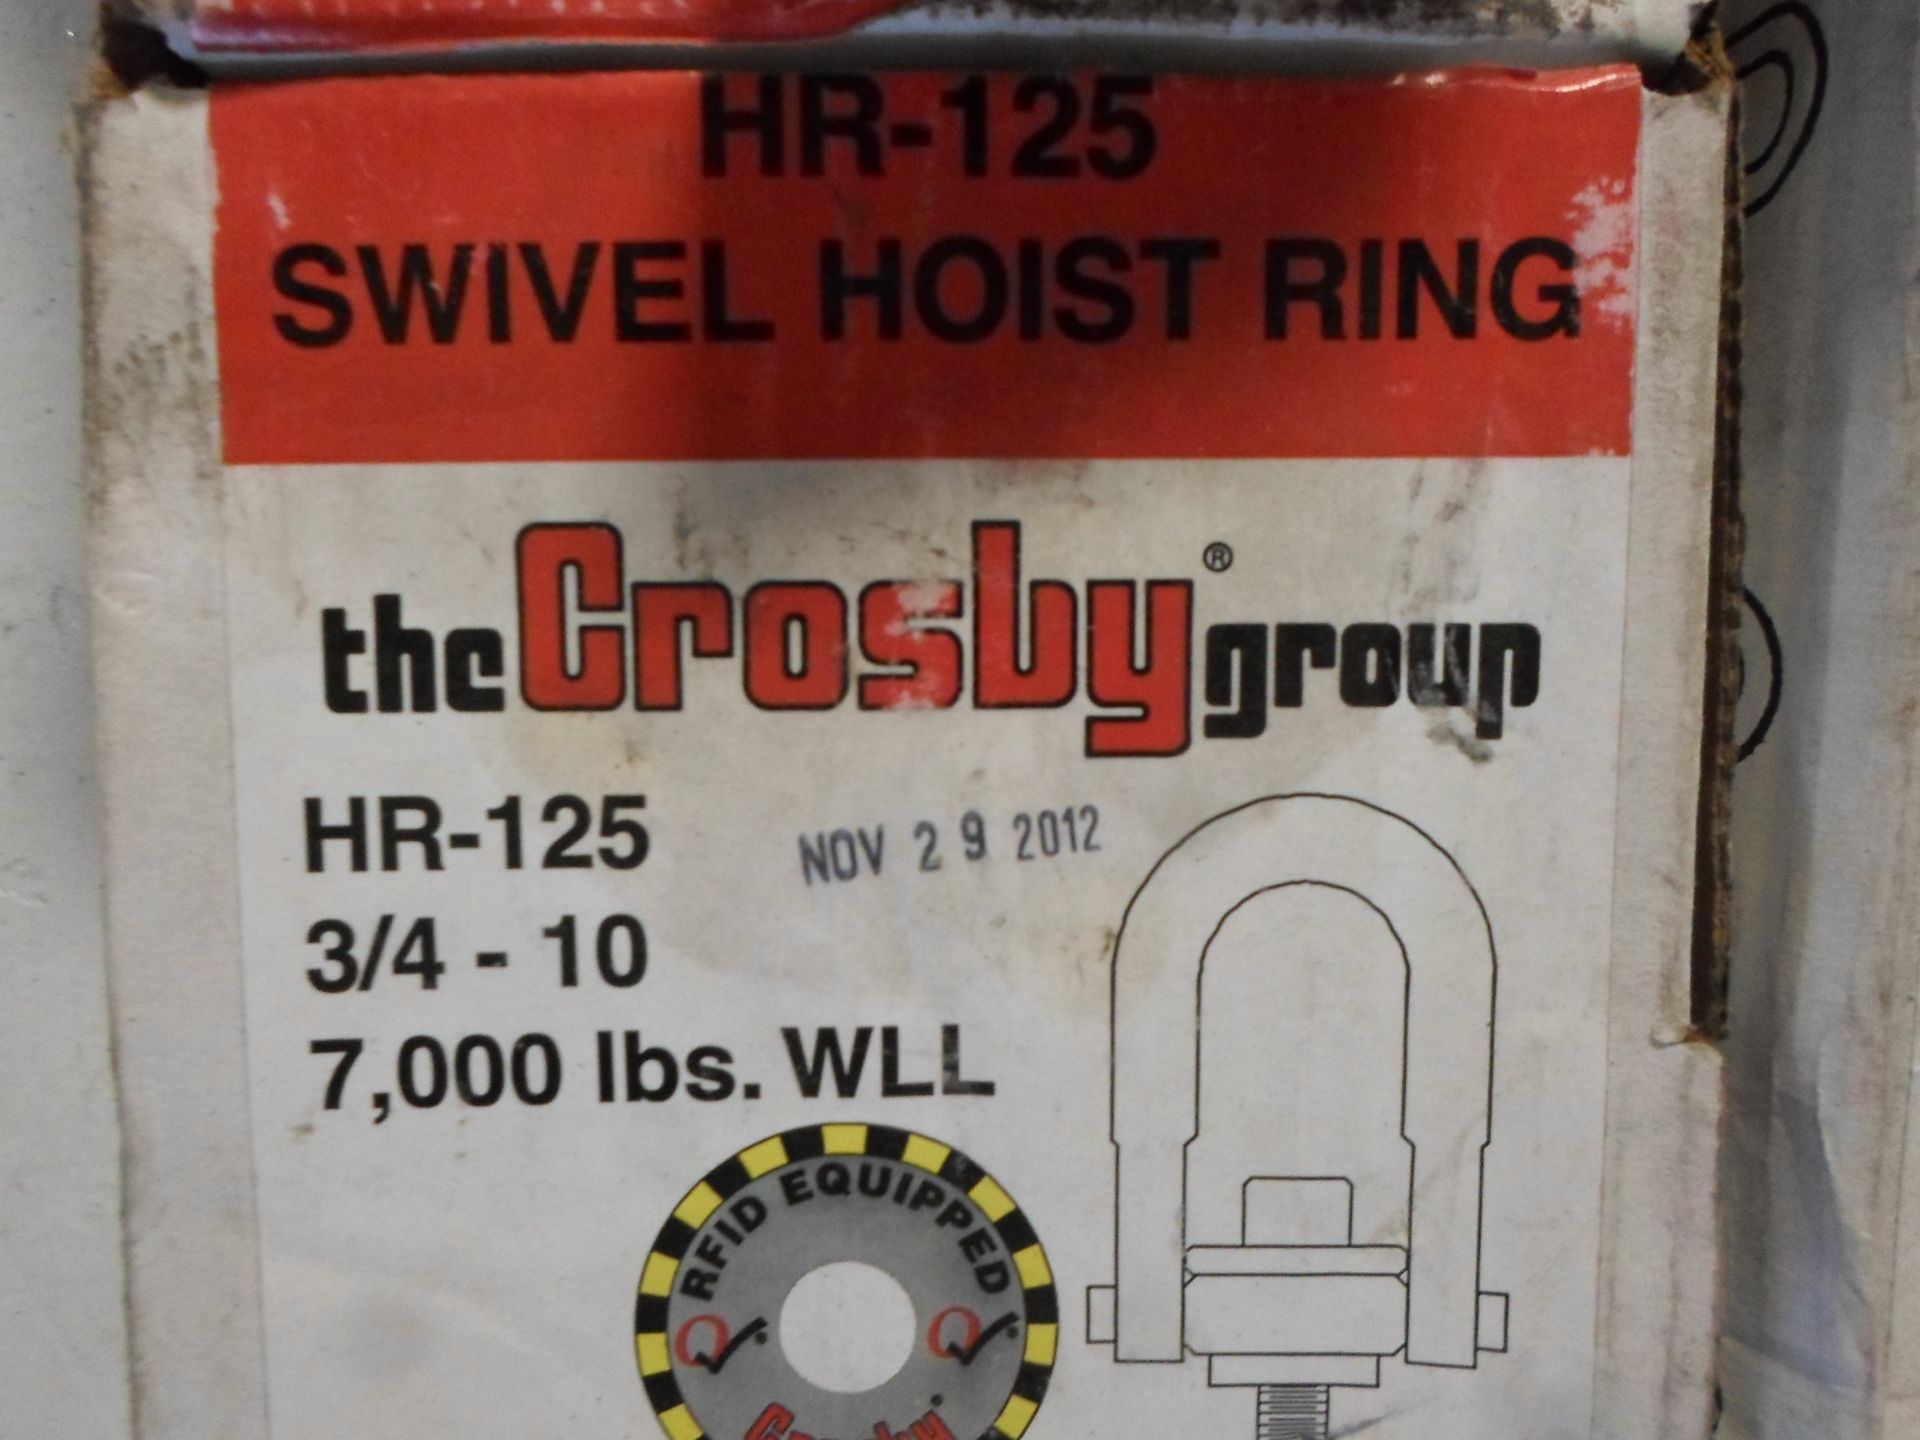 LOT OF FOUR SWIVEL HOIST RING HR-125 THE CROSBY GROUP 7,000 LBS ON IN EACH BOX - Image 2 of 3